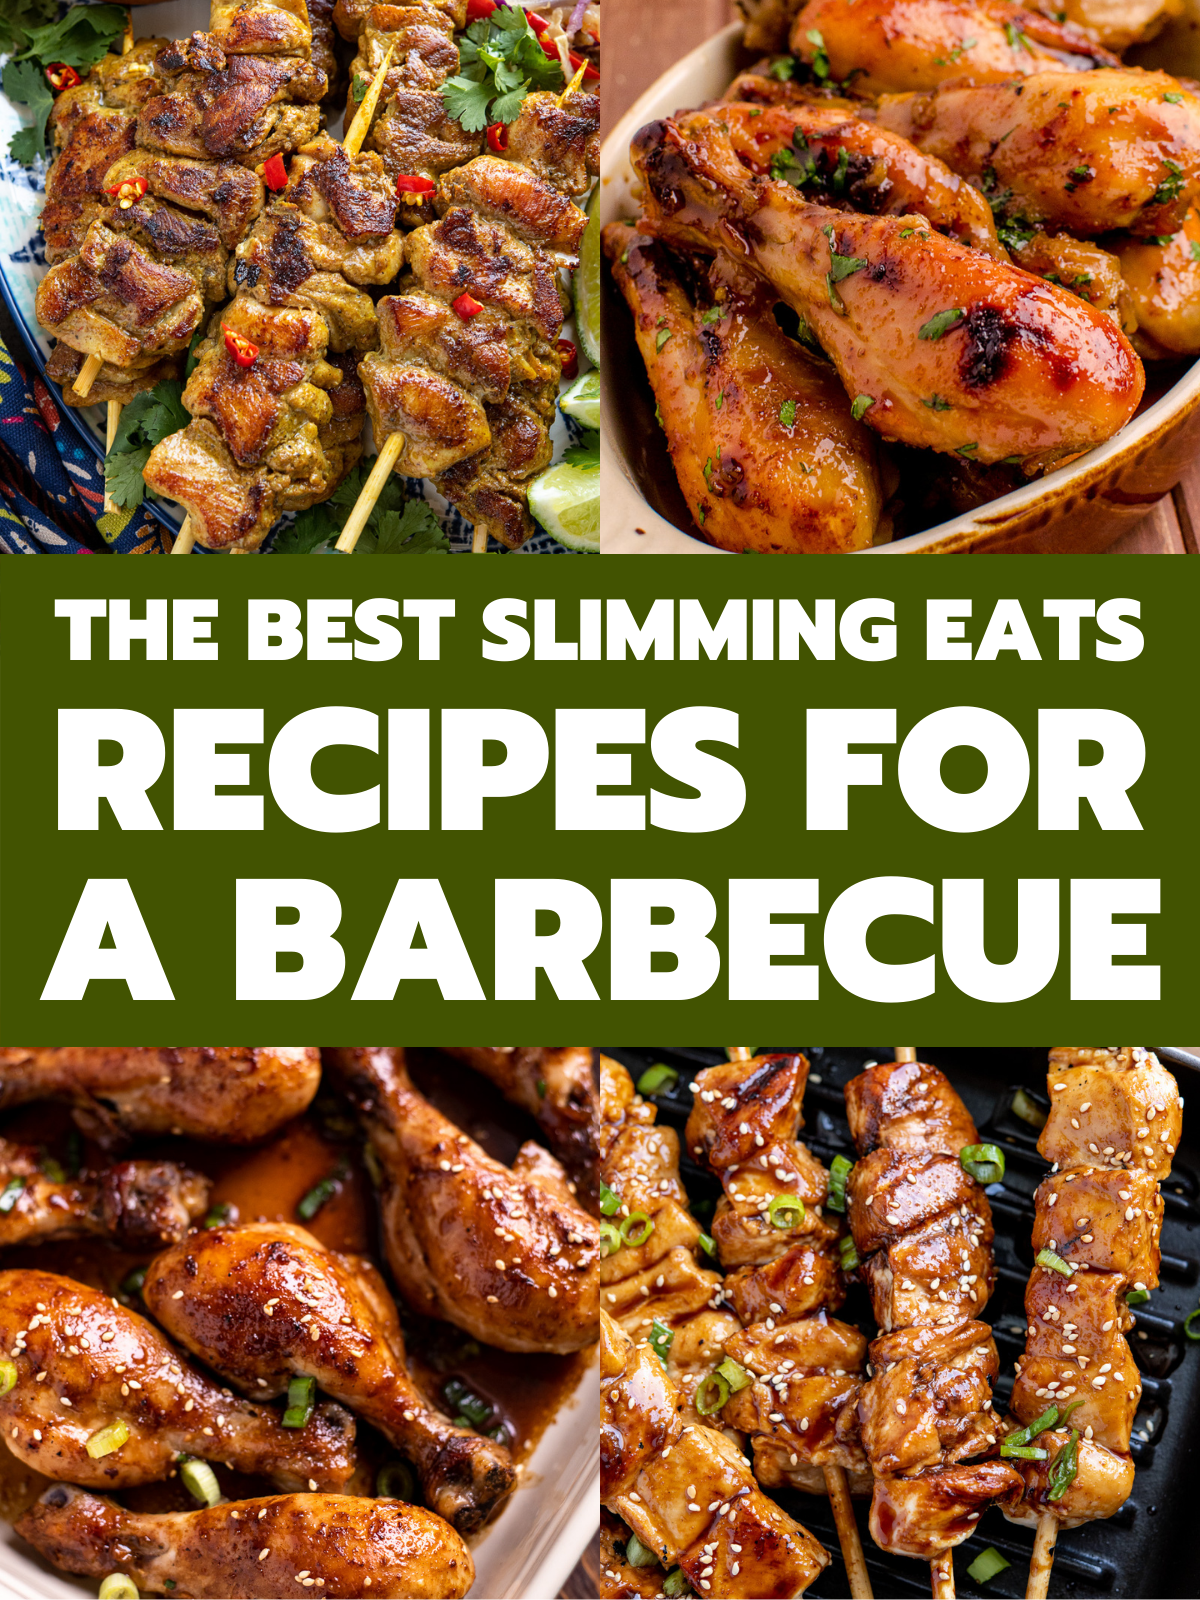 feature image of recipes for a barbecue from Slimming Eats